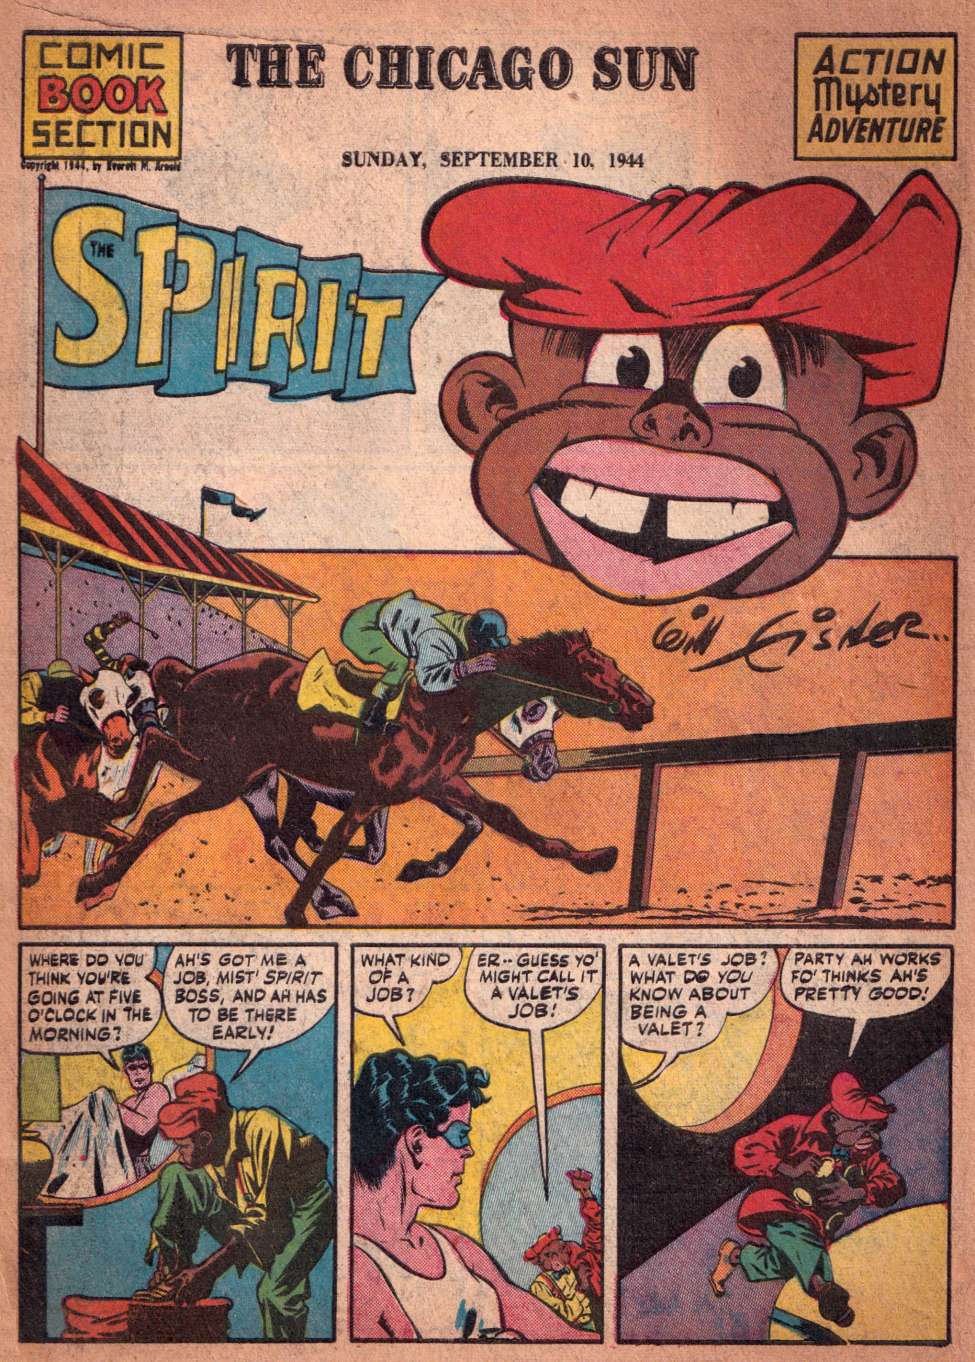 Book Cover For The Spirit (1944-09-10) - Chicago Sun